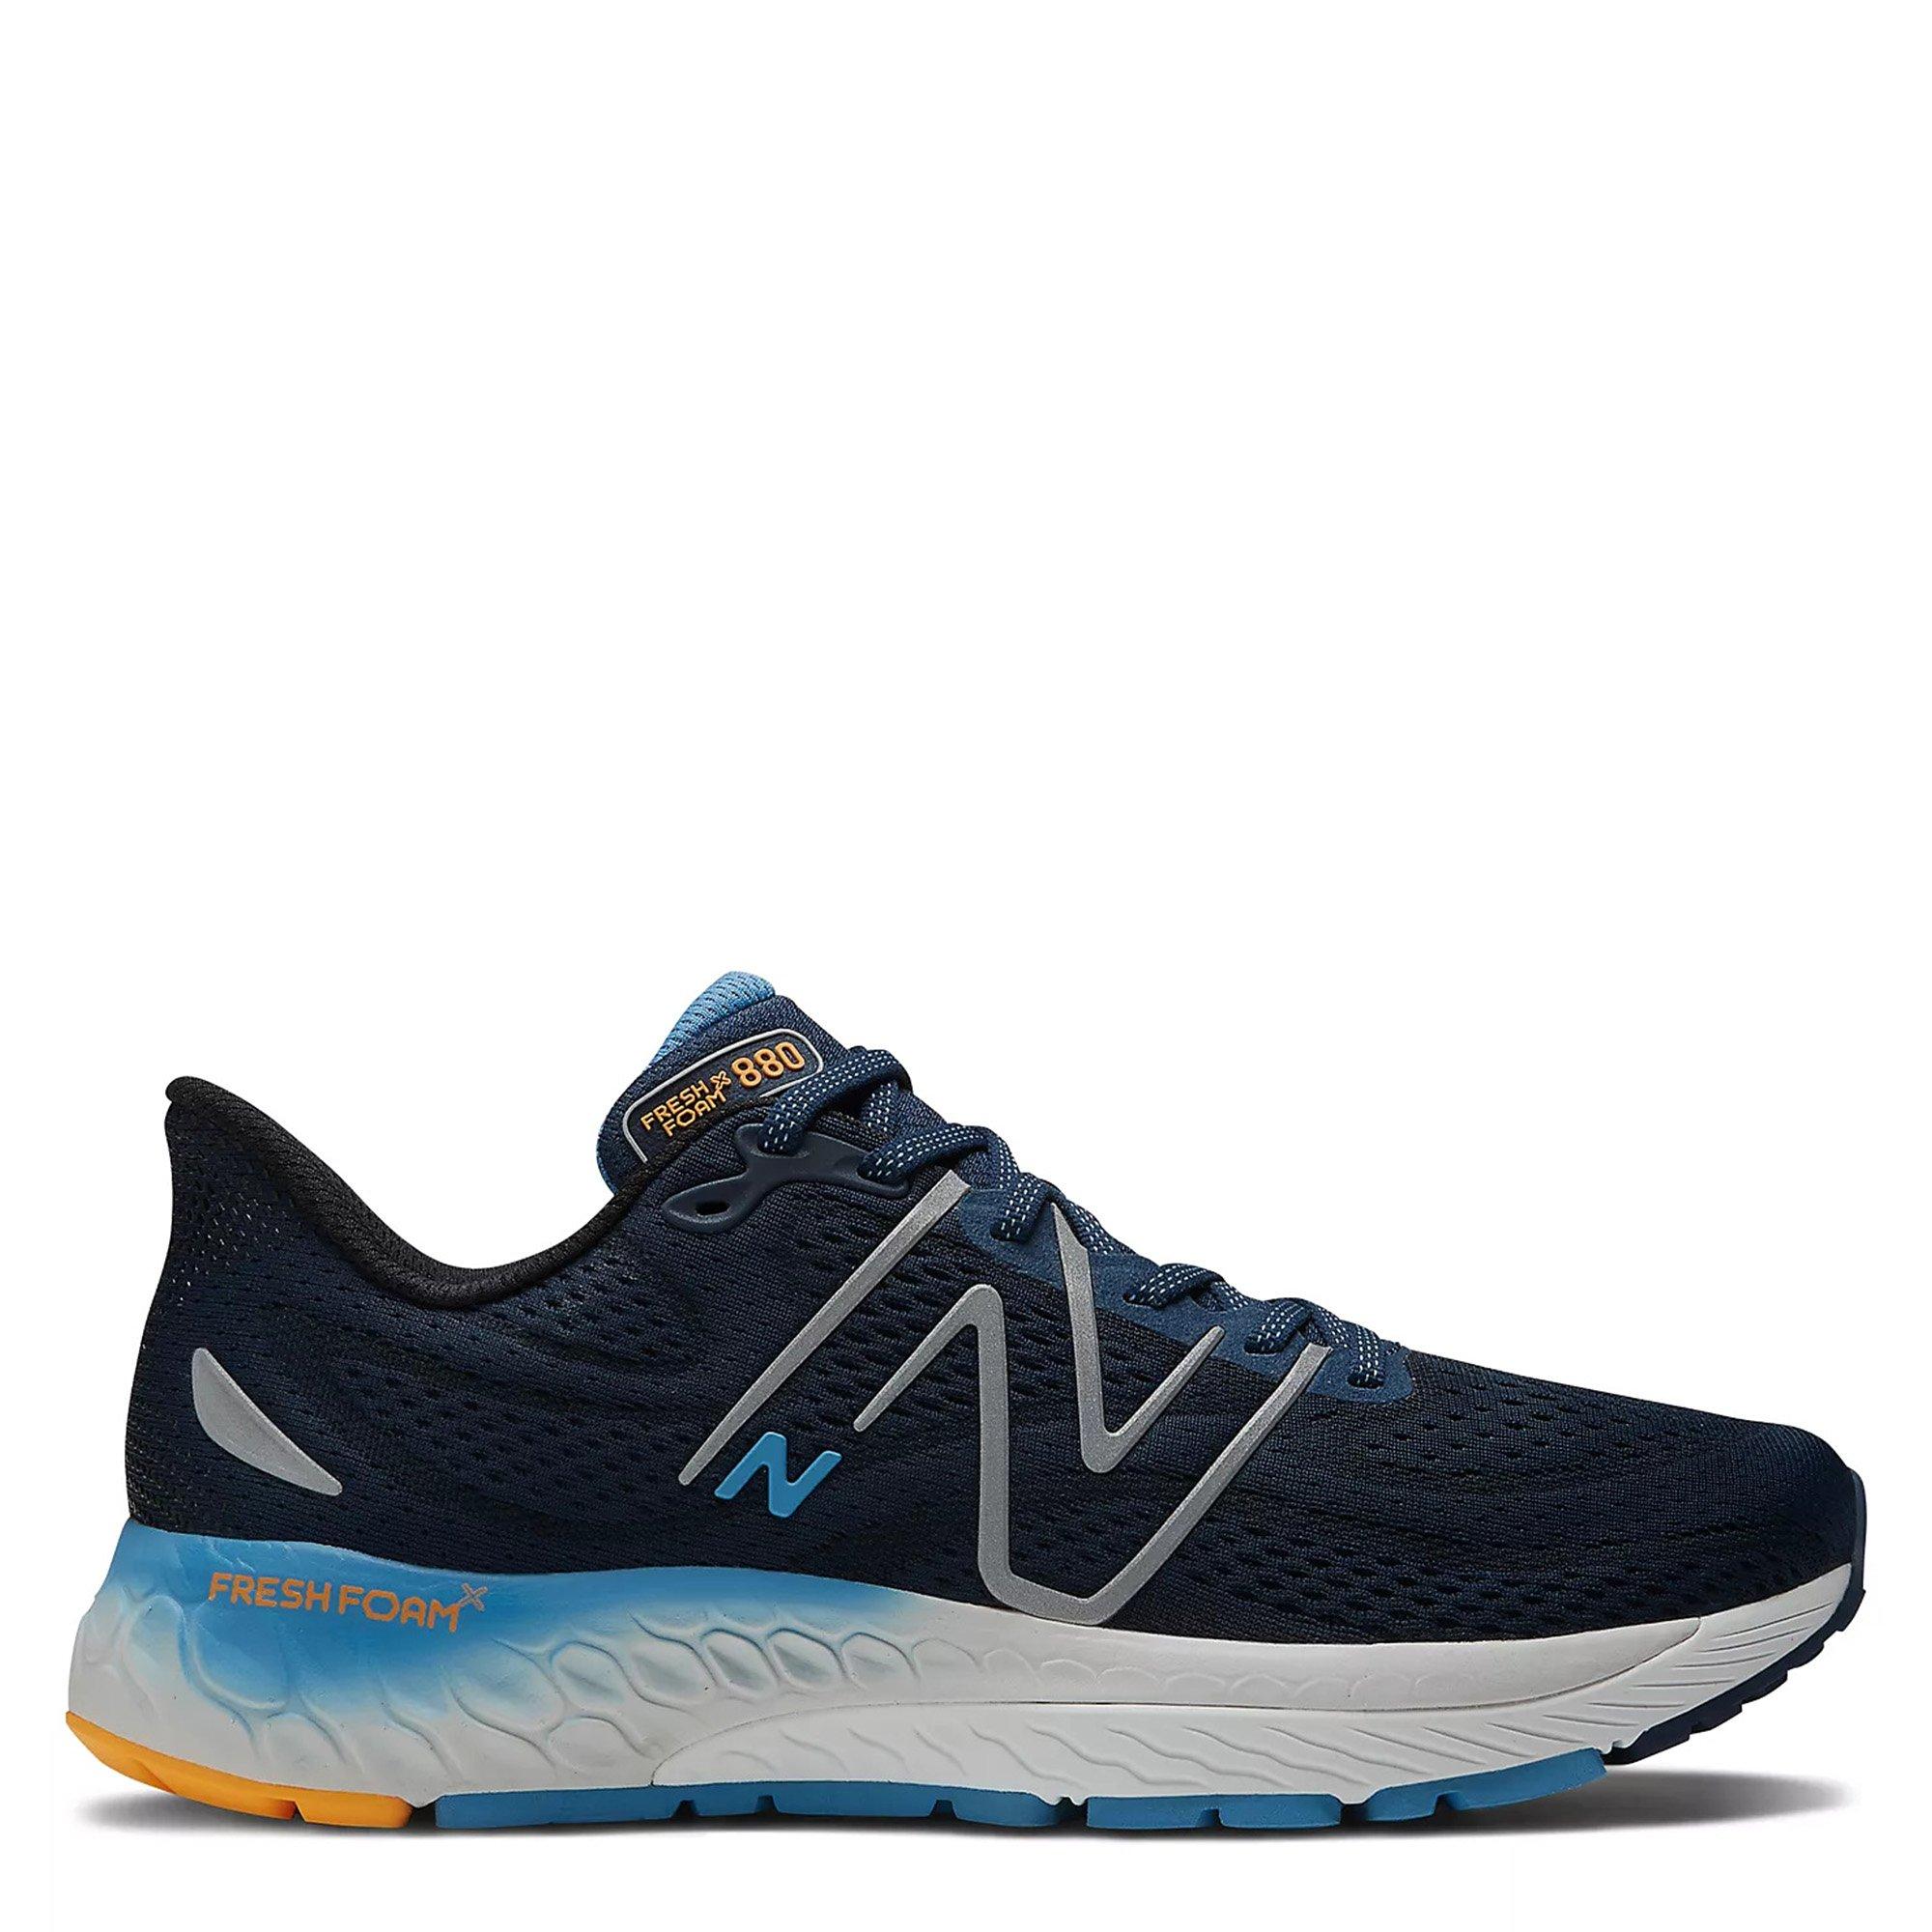 New Balance | FFX 880 13 Sn33 | Everyday Neutral Road Running Shoes ...